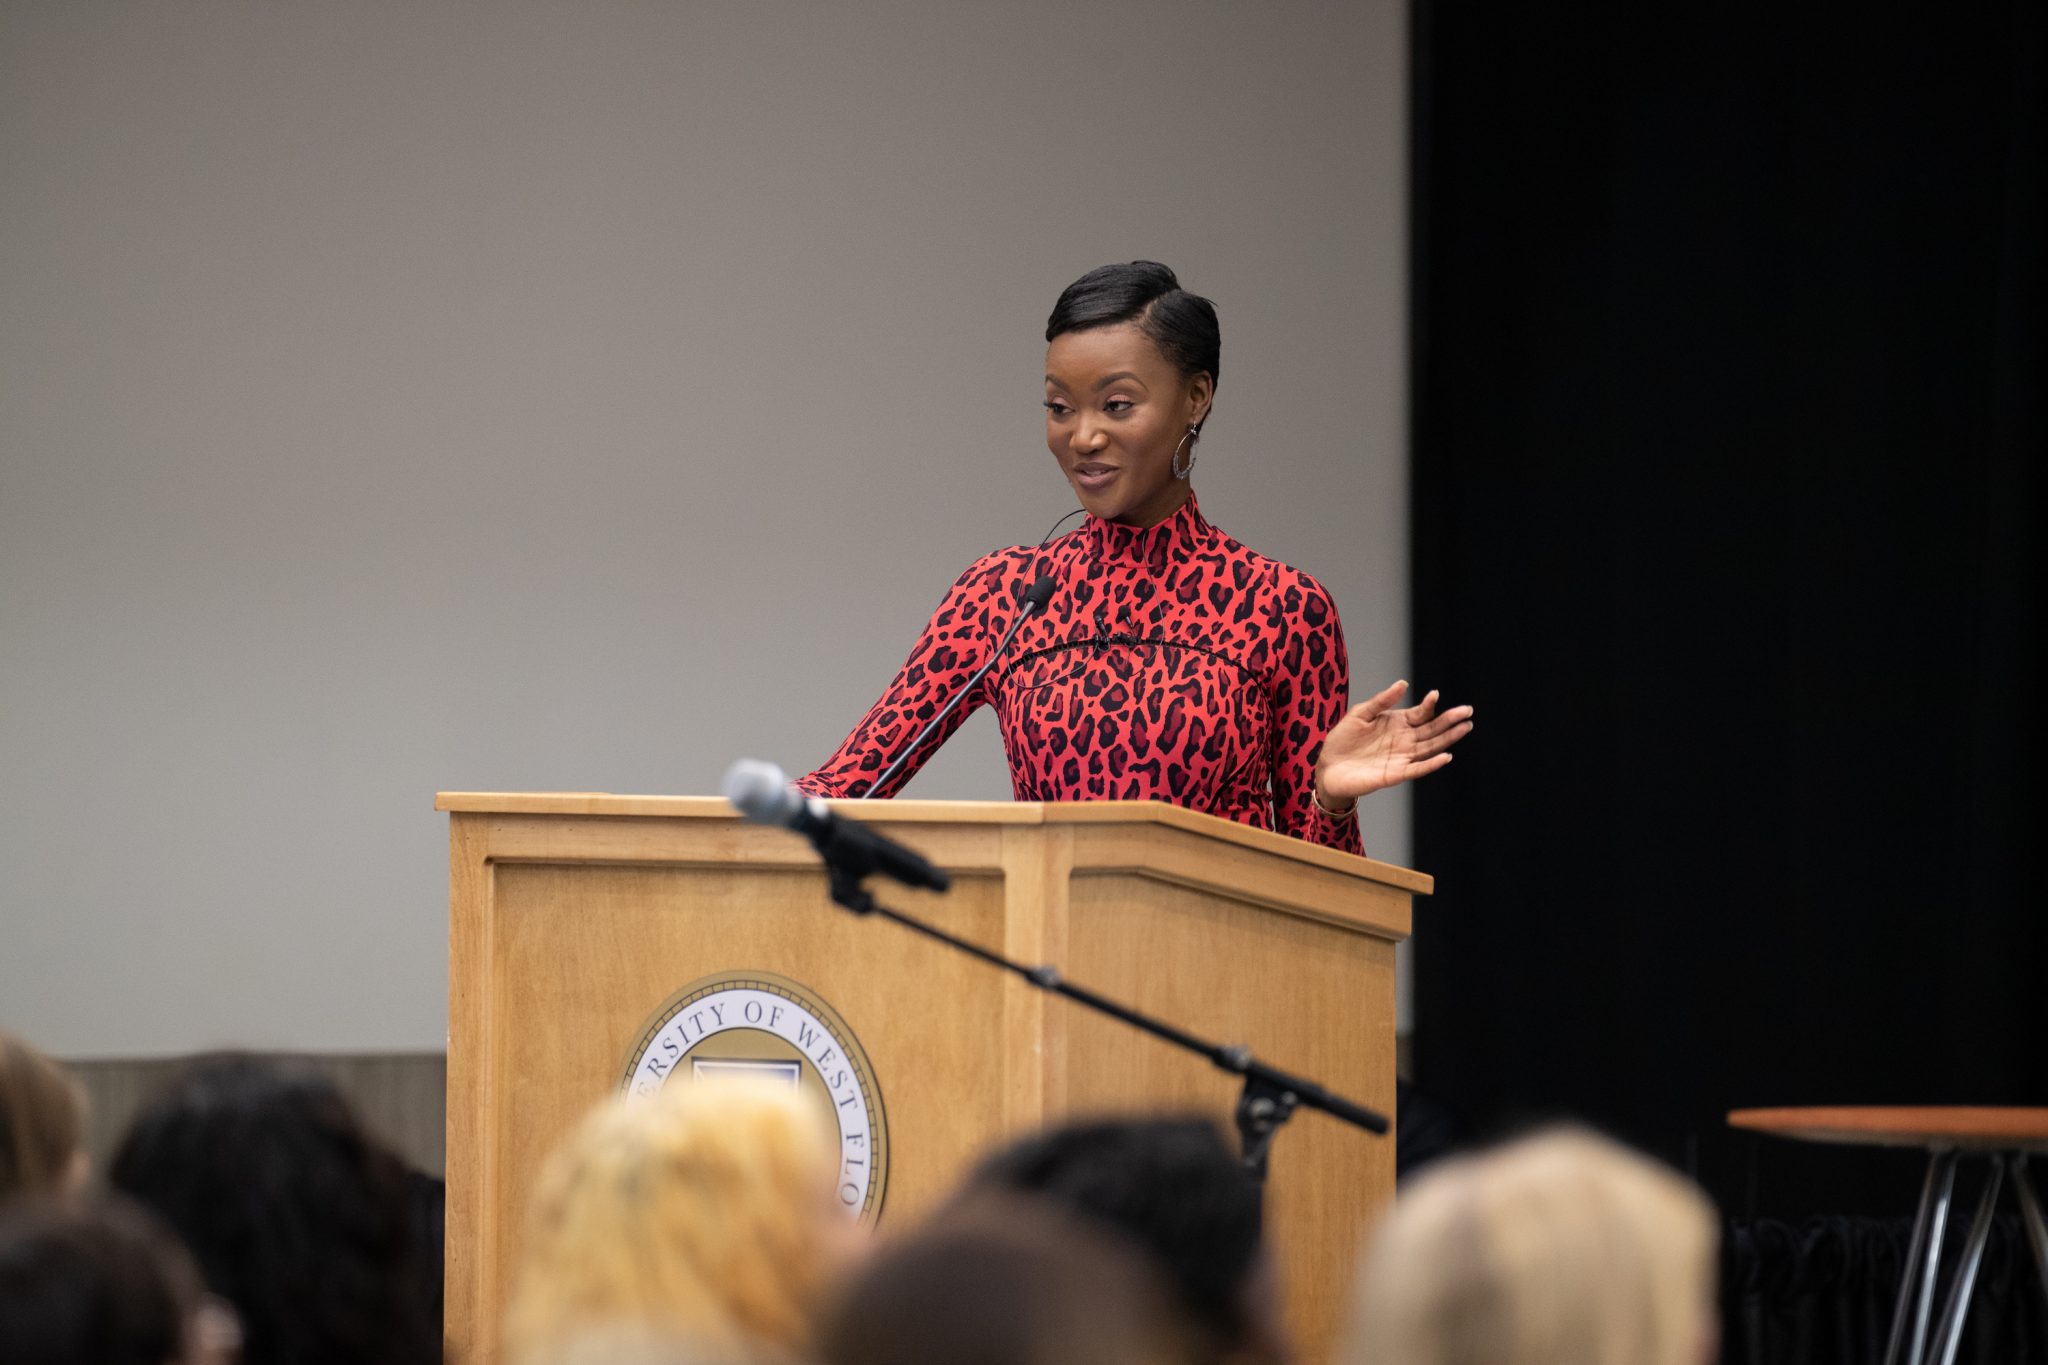 The 2020 Women in Leadship keynote speaker, Deshauna Barber, a former Miss USA, U.S. Army Captain and STEM graduate taking the stage